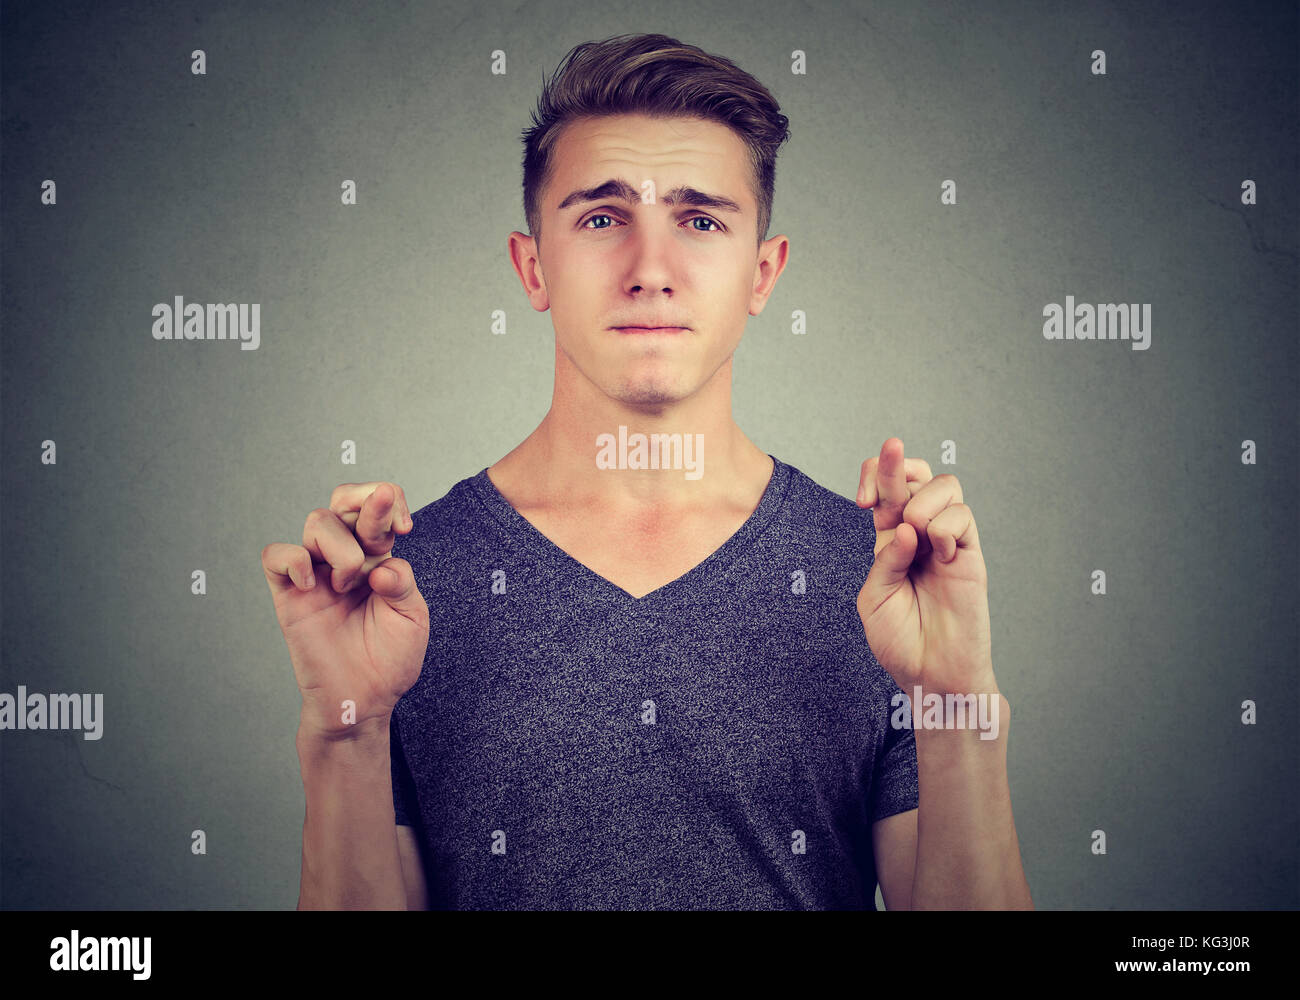 Hopeful man crossing his fingers hoping isolated on gray wall background. Human emotions, feelings reaction Stock Photo